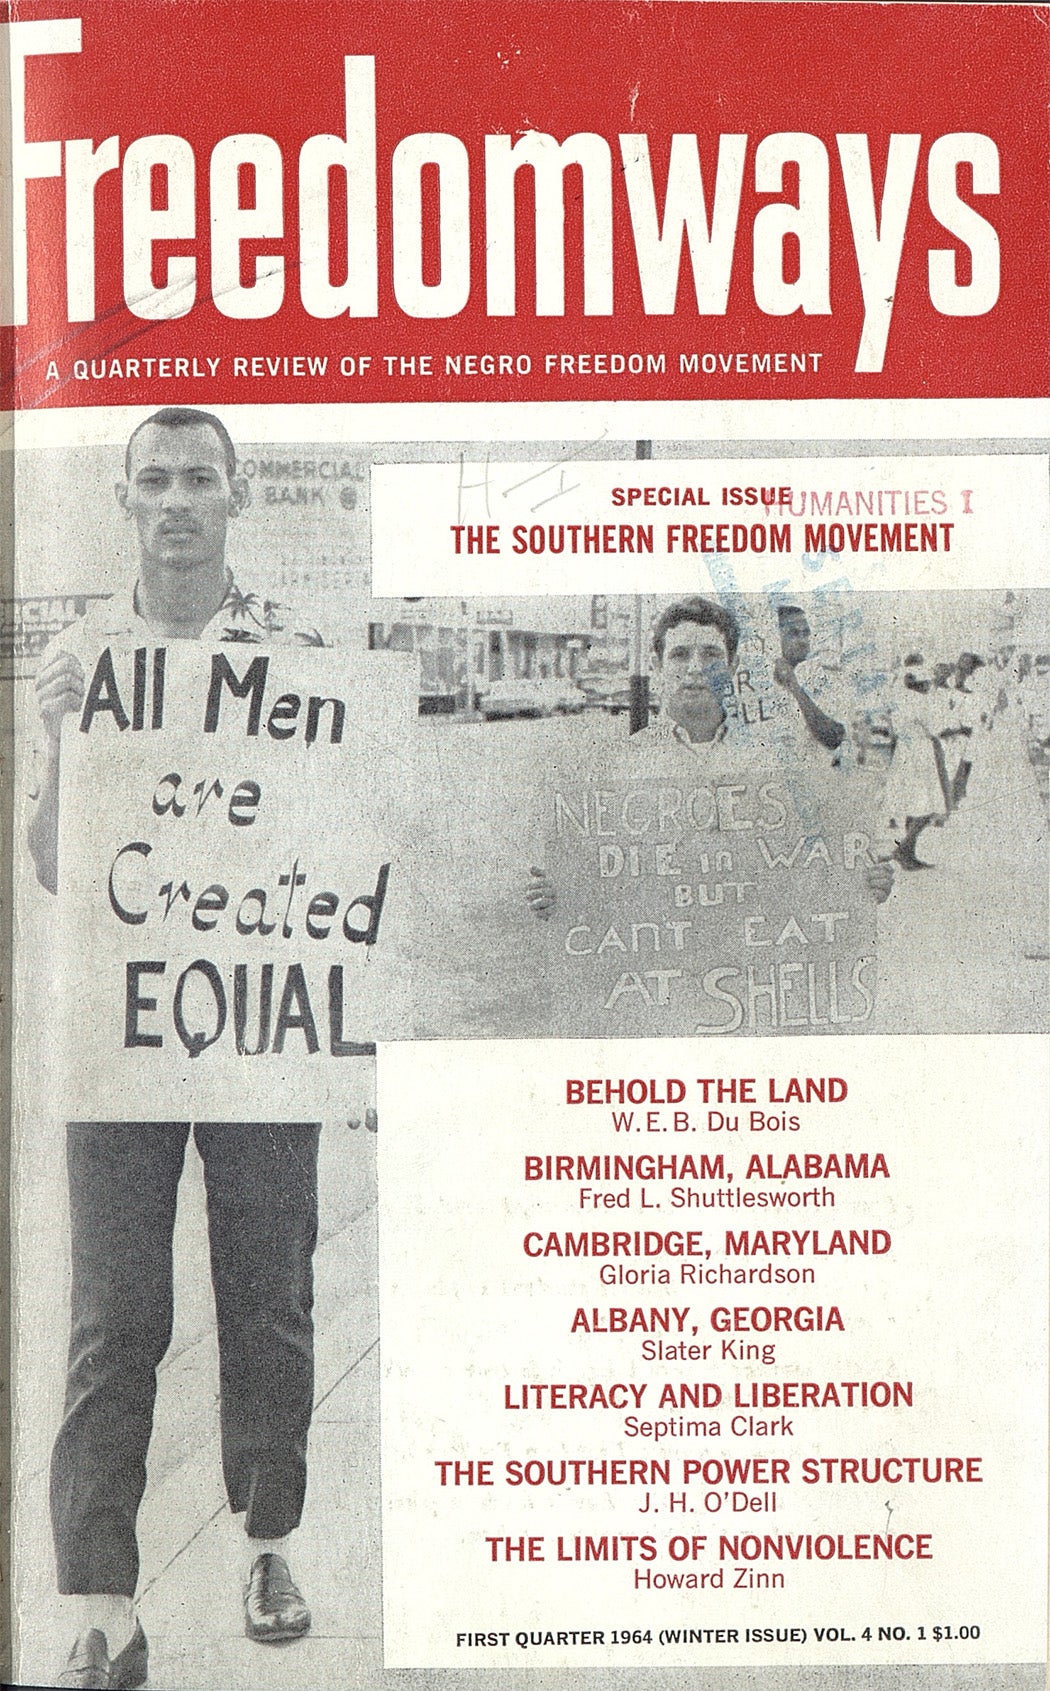 research topics on civil rights movement